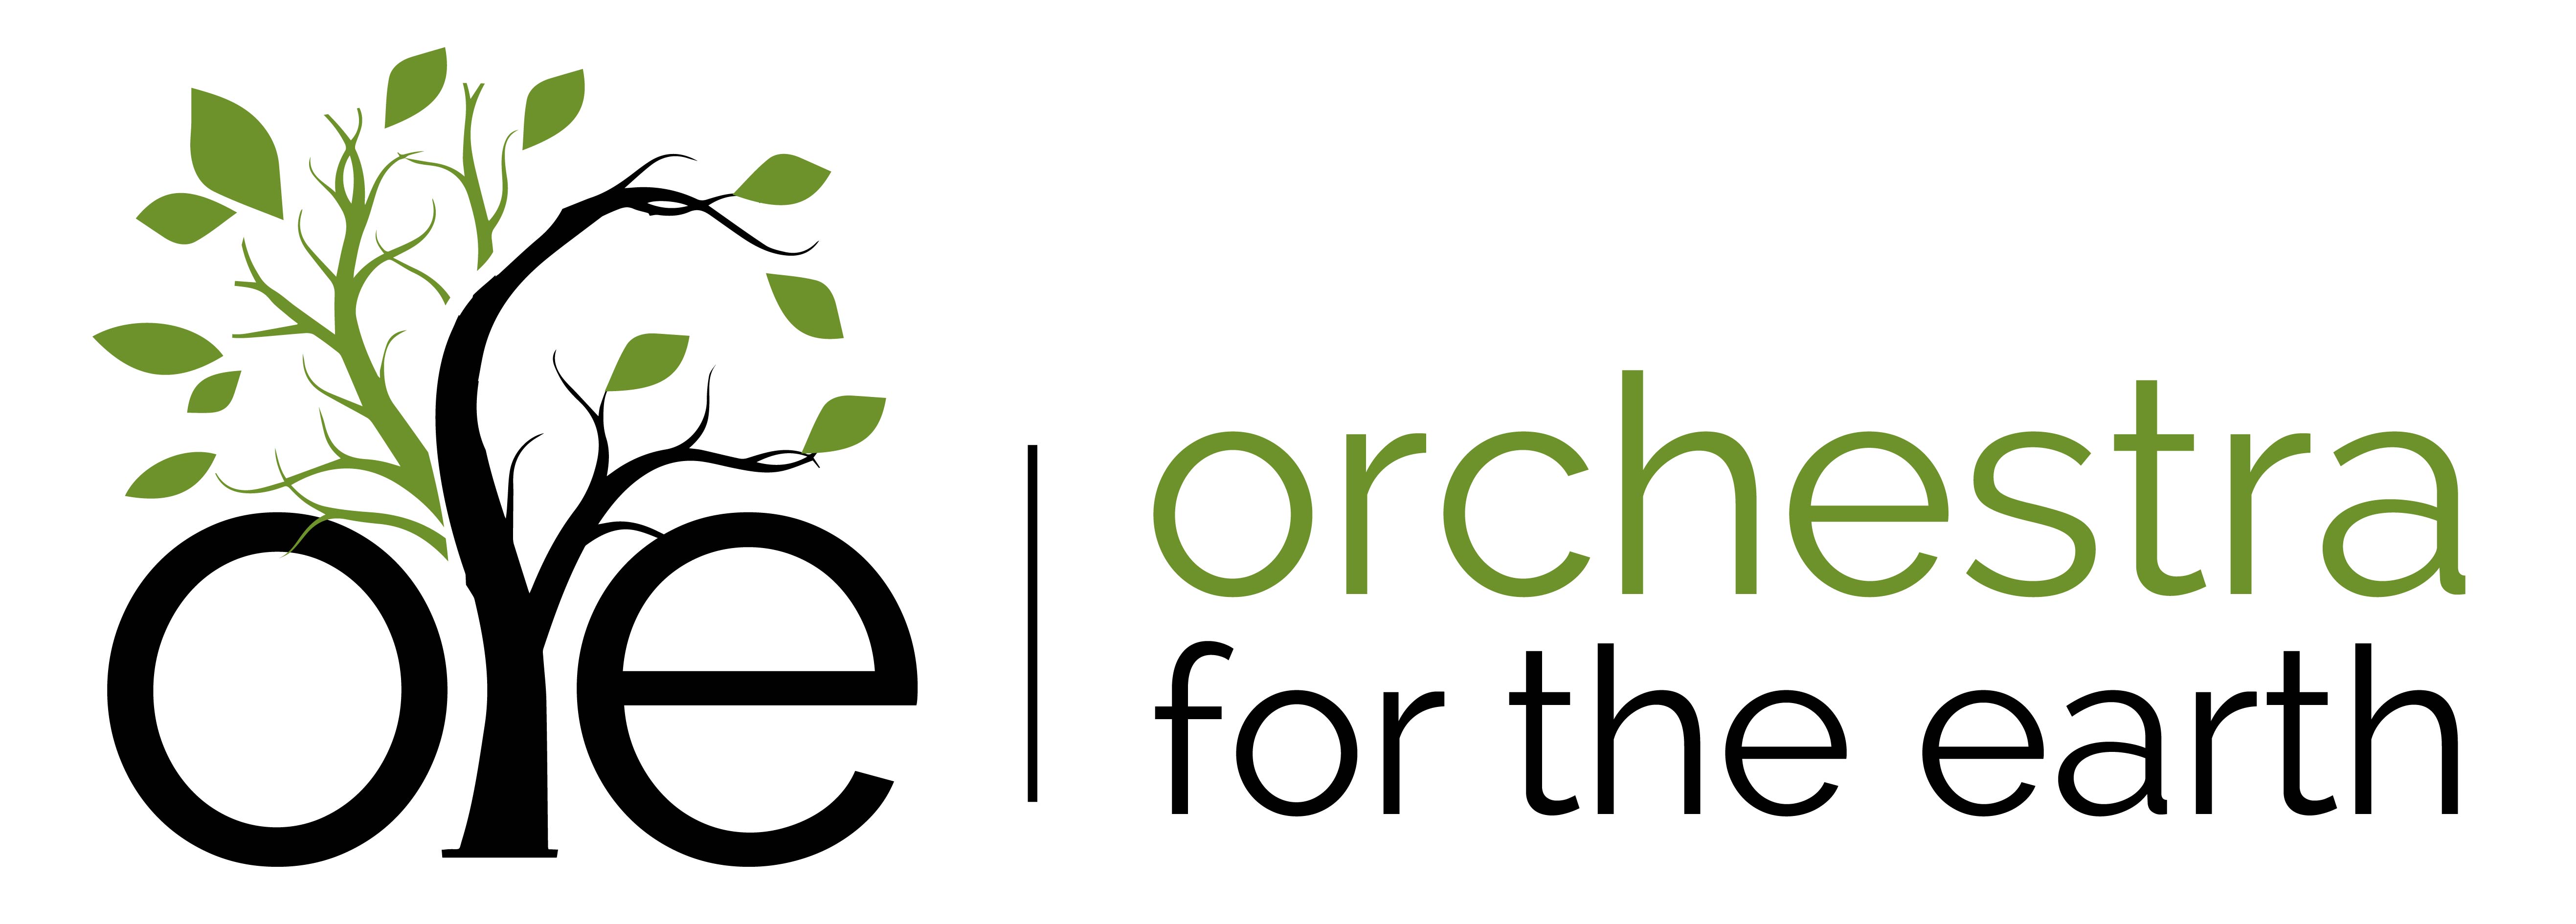 Orchestra for the Earth logo